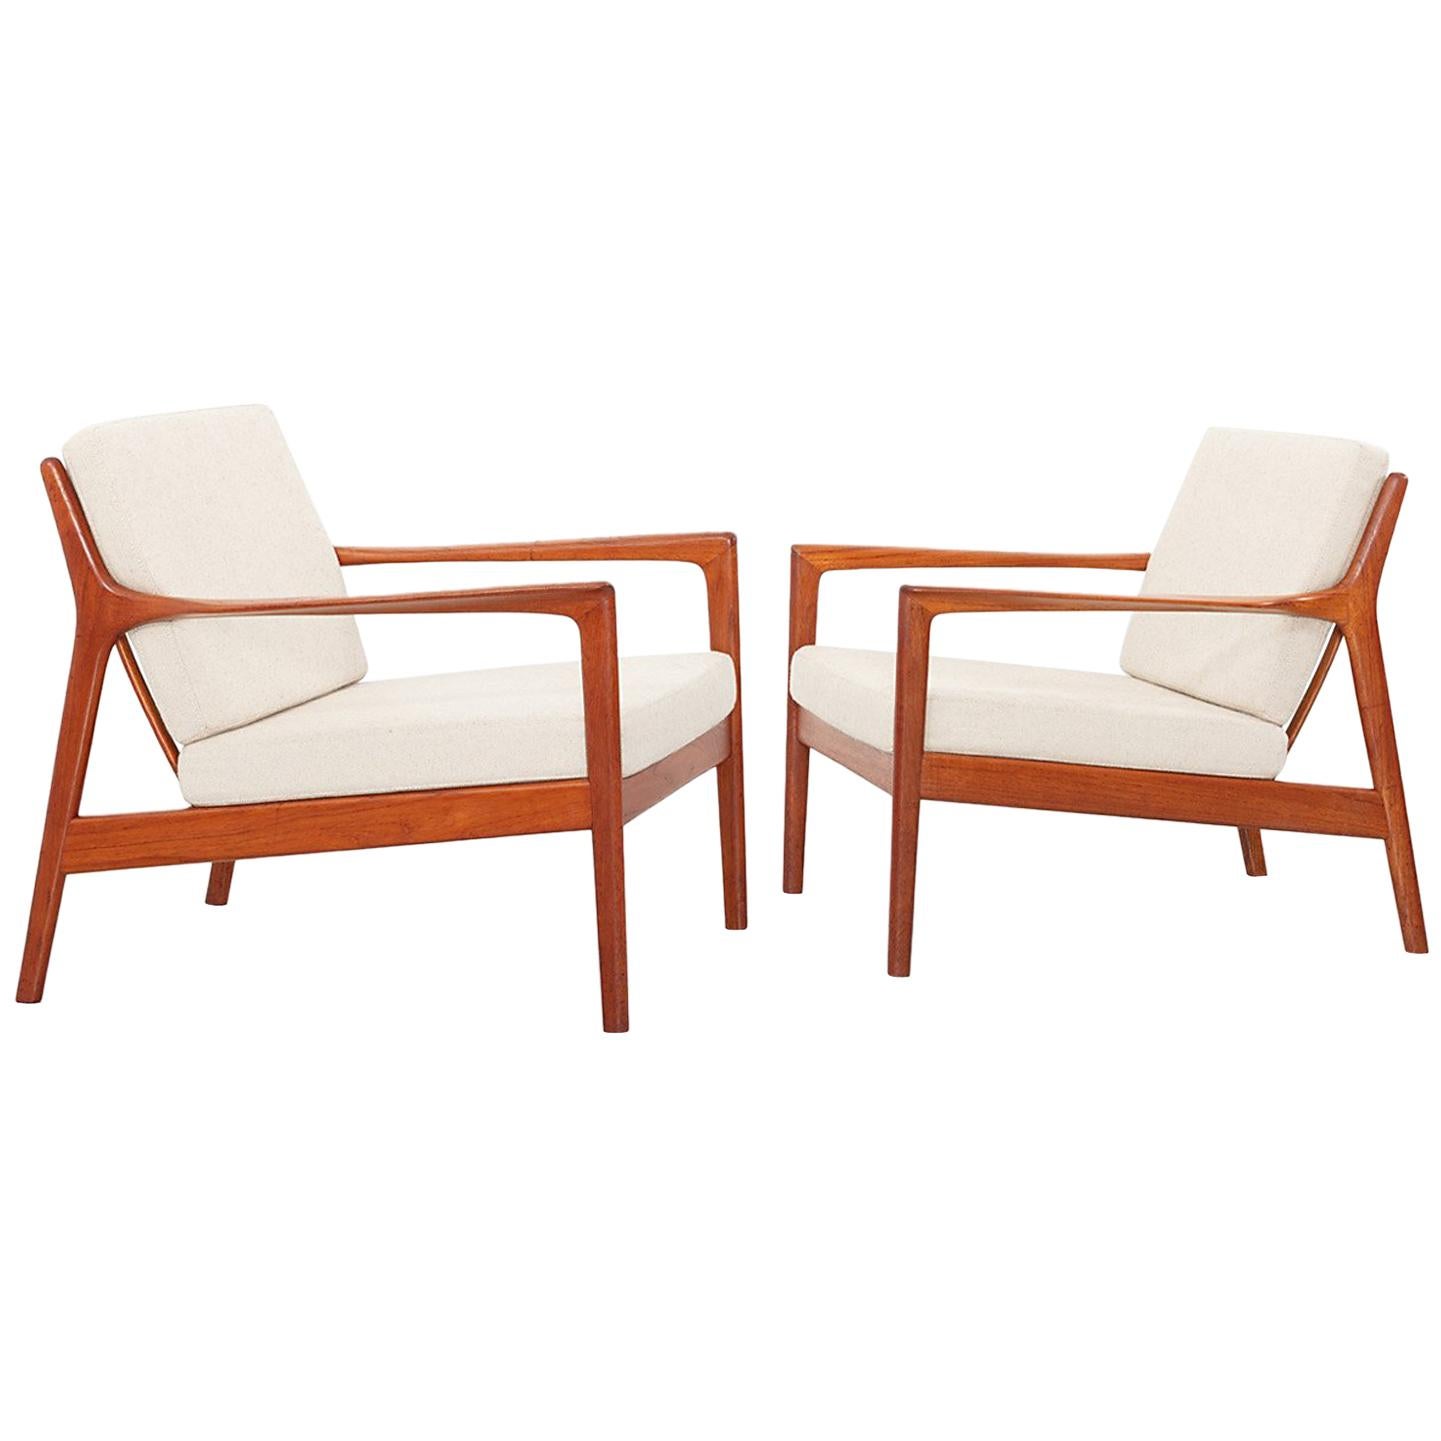 USA-75 Easy Chairs by Folke Ohlsson for DUX, Sweden 1950s For Sale